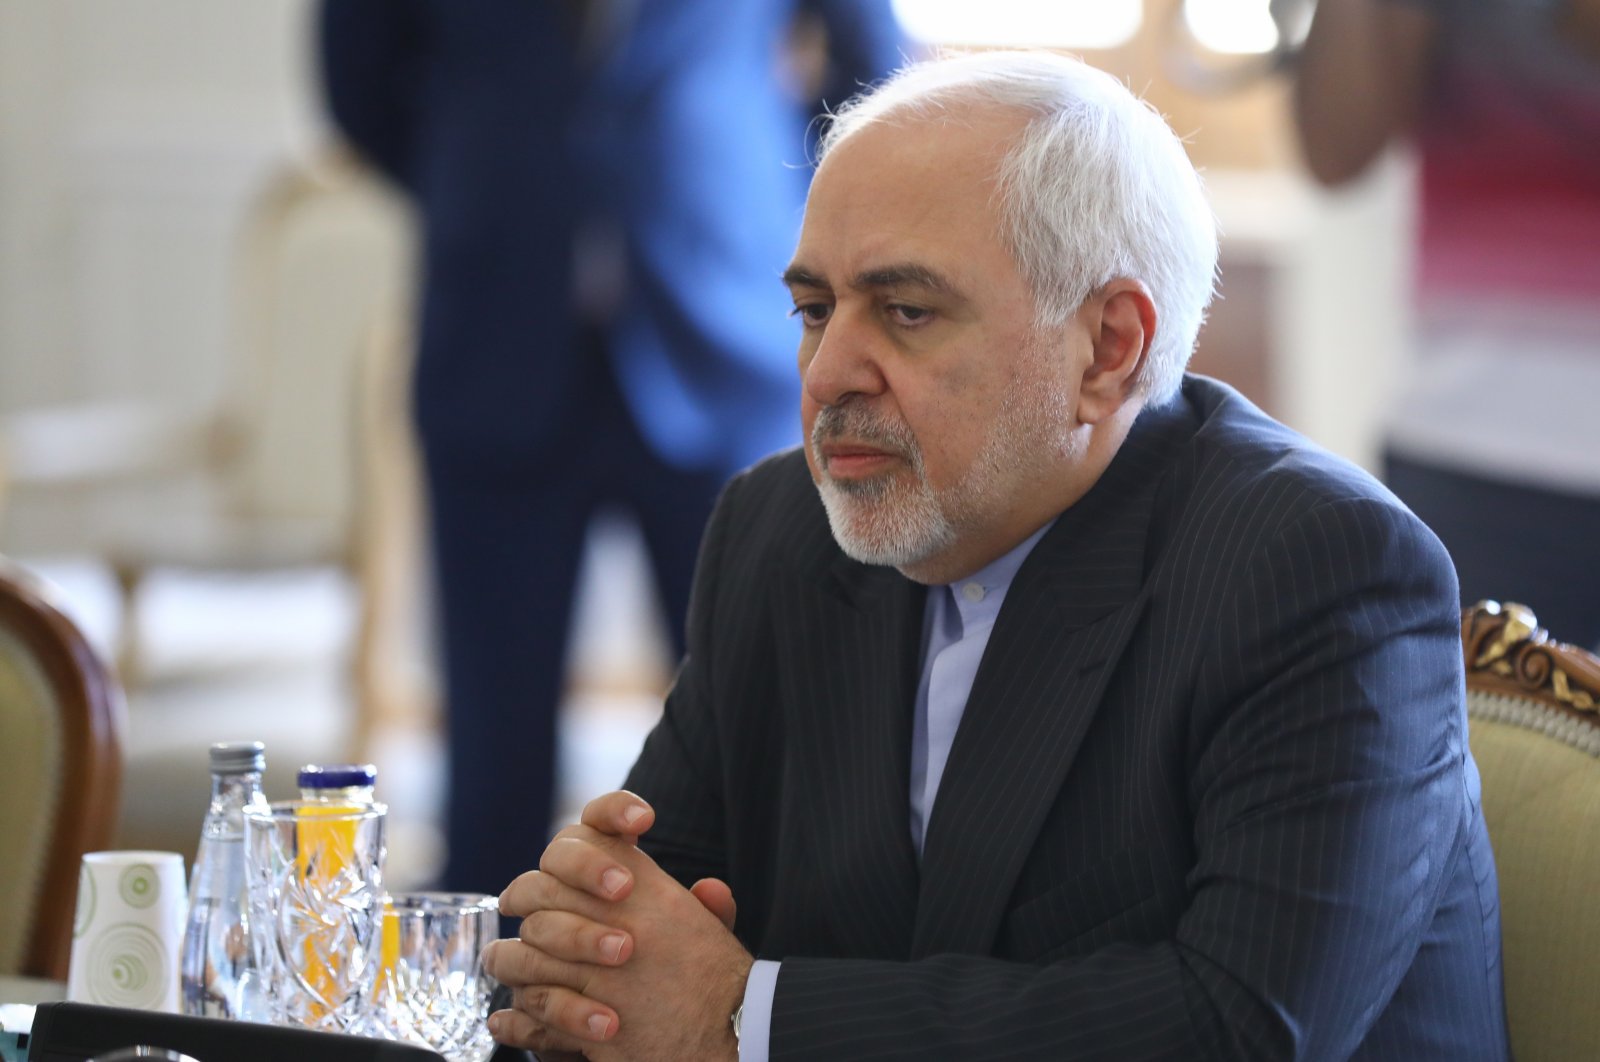 Iranian Foreign Minister Javad Zarif during his meeting with Russian Foreign Minister Sergei Lavrov (not pictured) in Tehran, Iran, April 13, 2021. (EPA Photo)